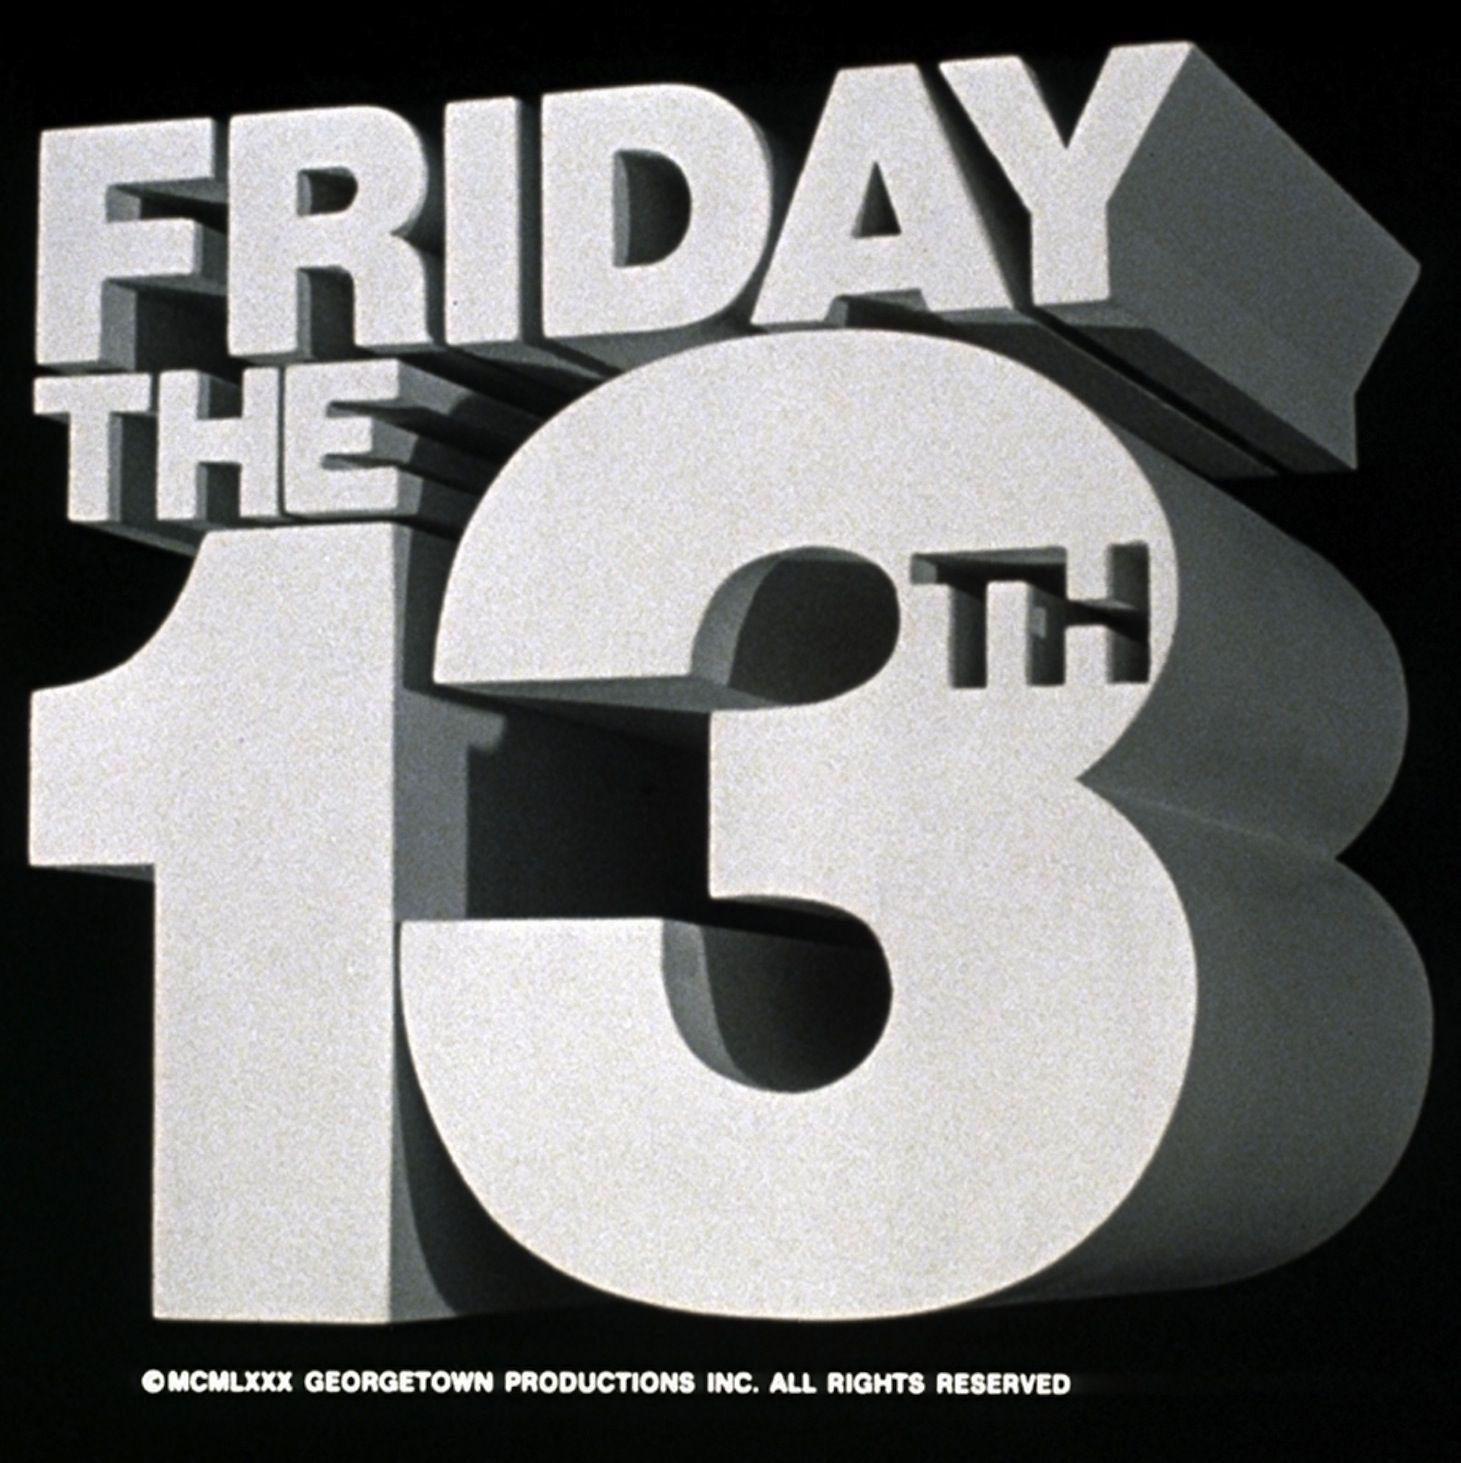 Friday the 13th Part 2 Logo - Friday the 13th Part 2: Evil Backwoods Wizardry